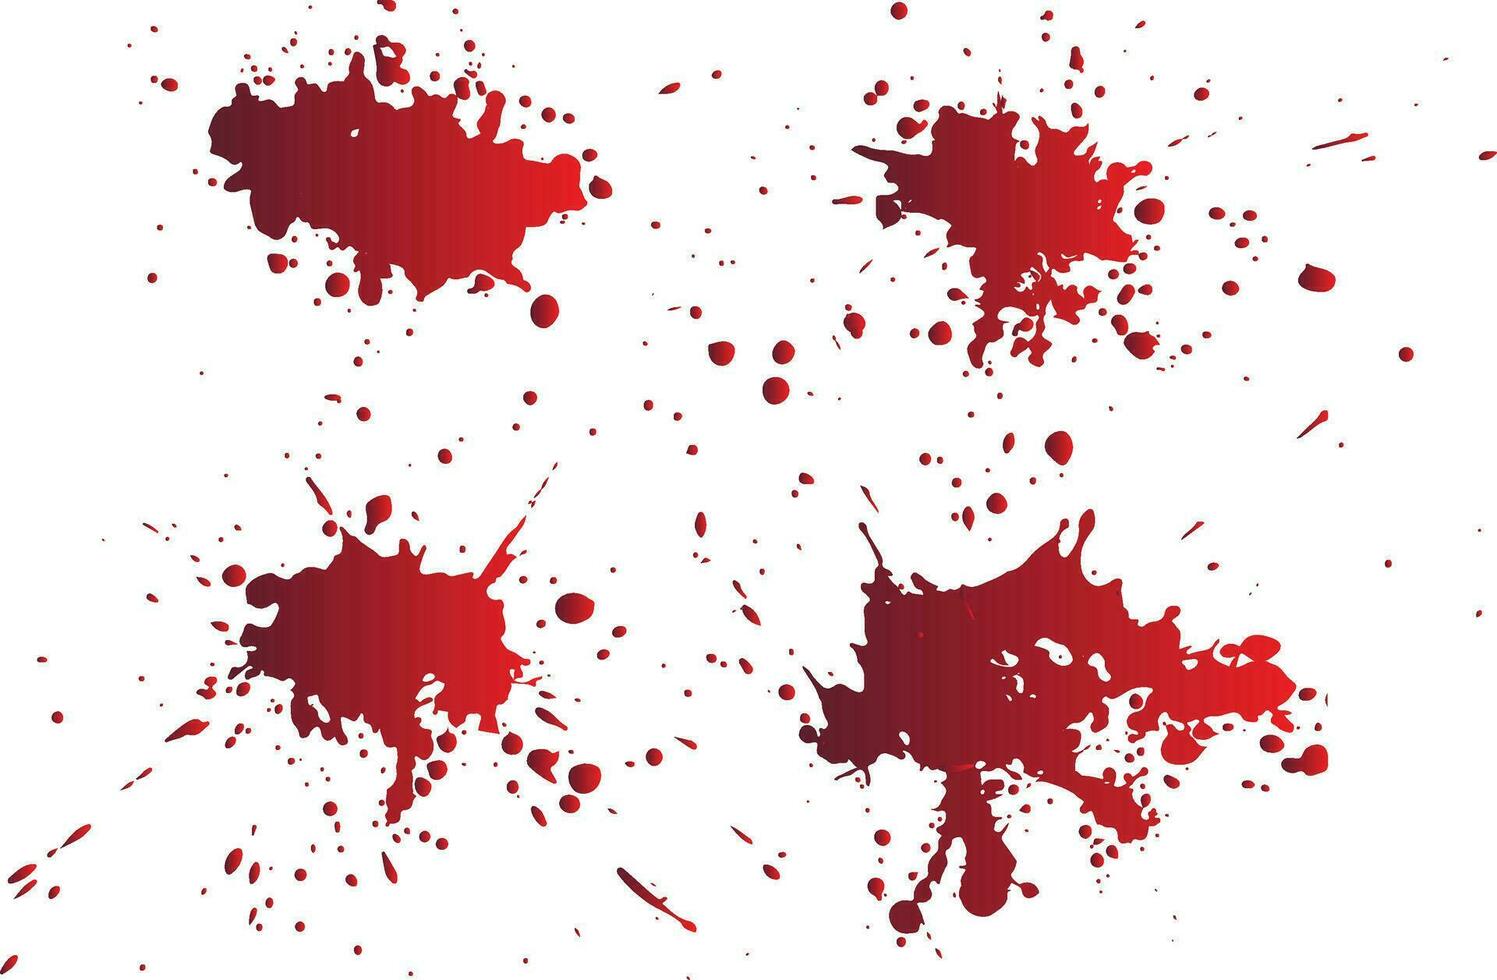 Red splatter stain background collection vector